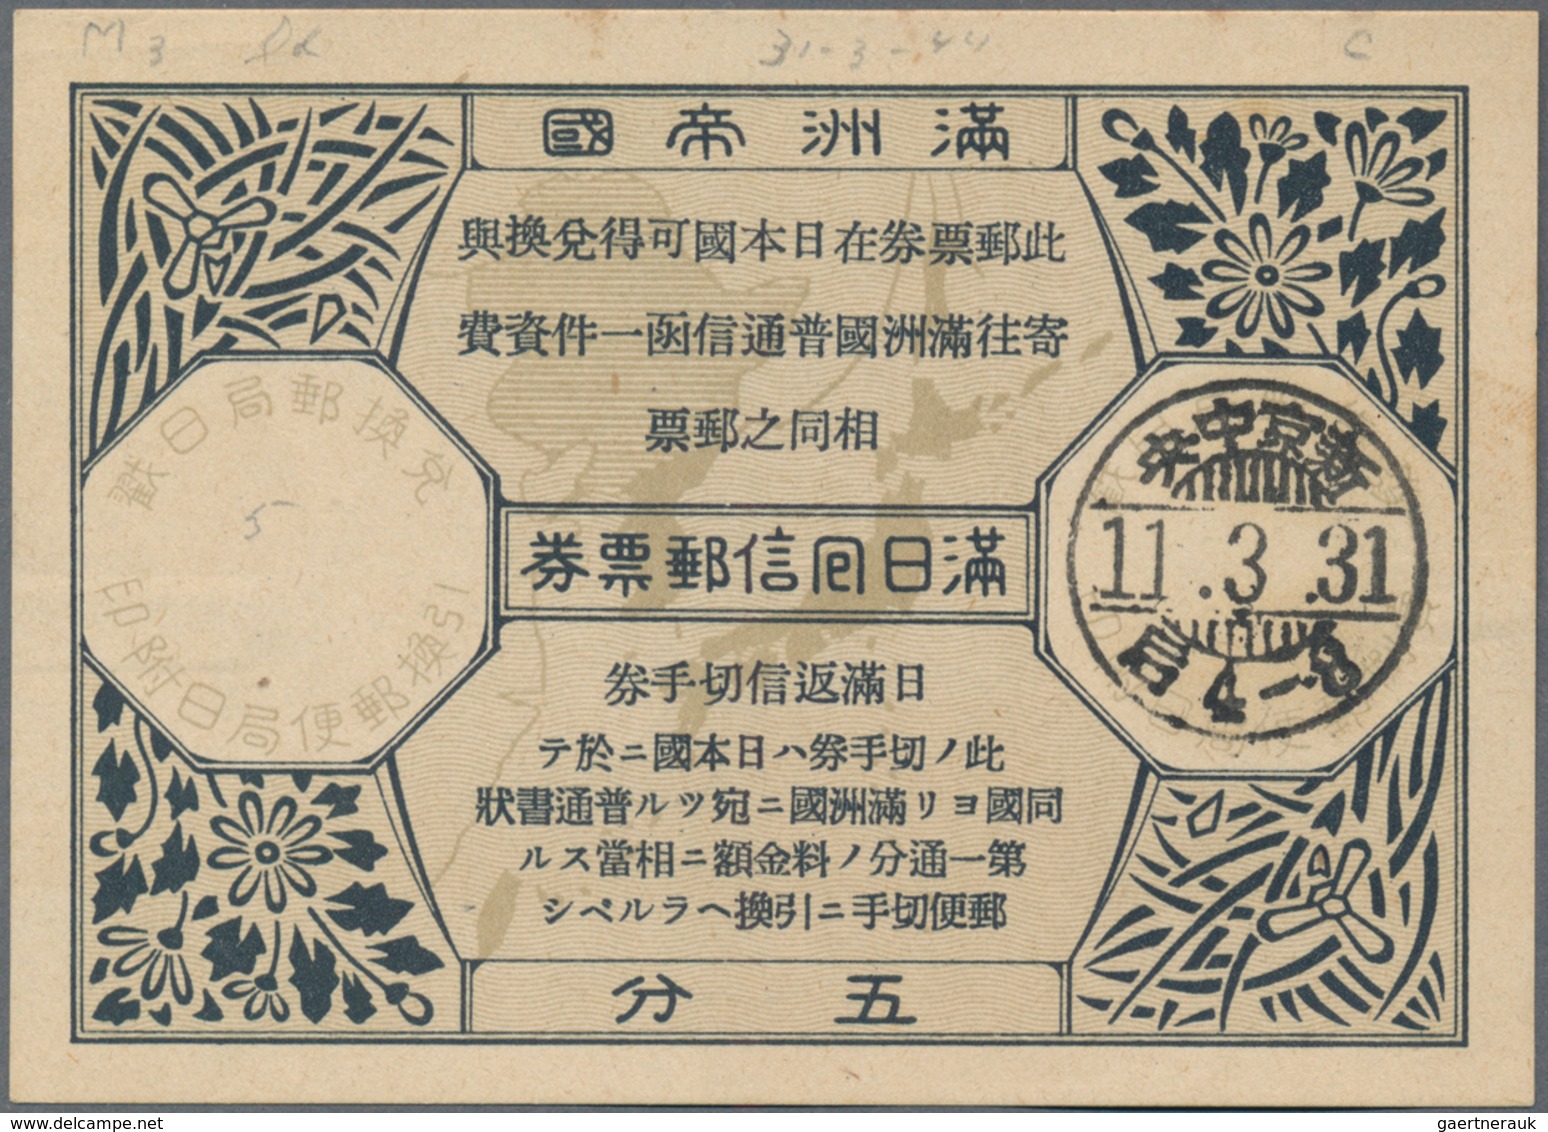 Mandschuko (Manchuko): 1936/42, the collection of Manchuko-Japan special reply coupons: 4 f., 4 f./5